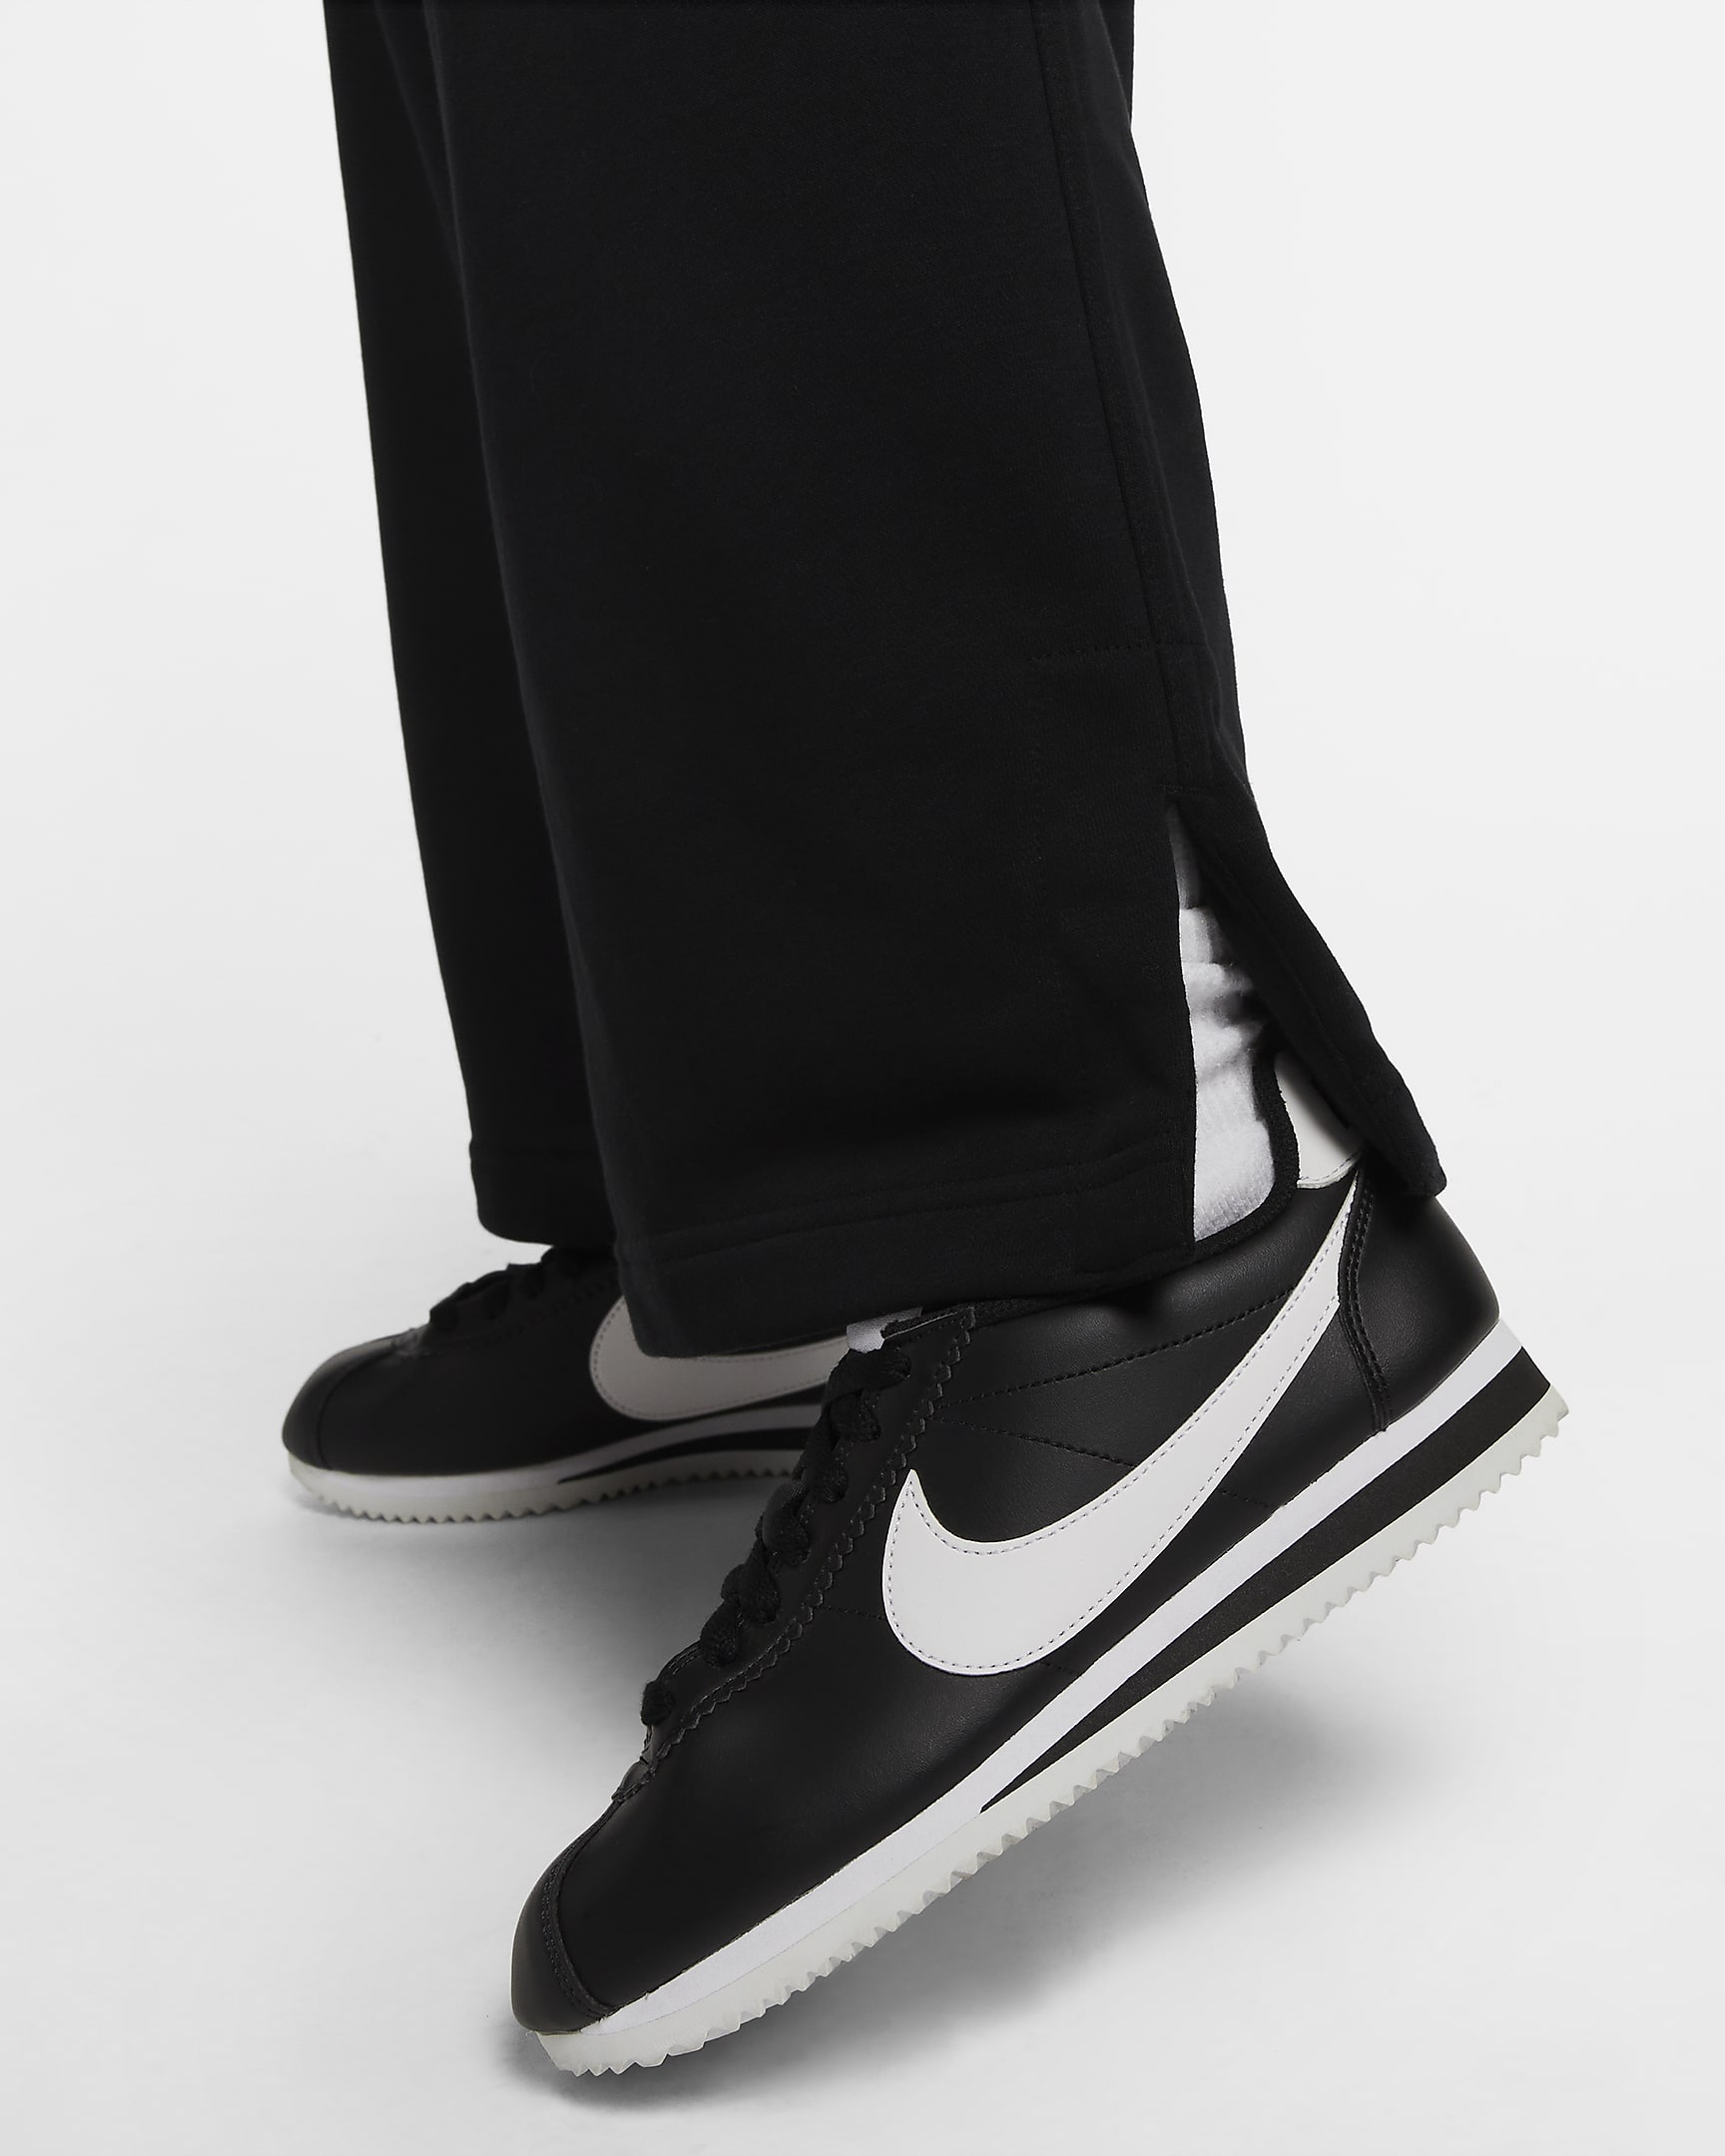 Nike Sportswear City Utility Women's High-Waisted French Terry Trousers ...